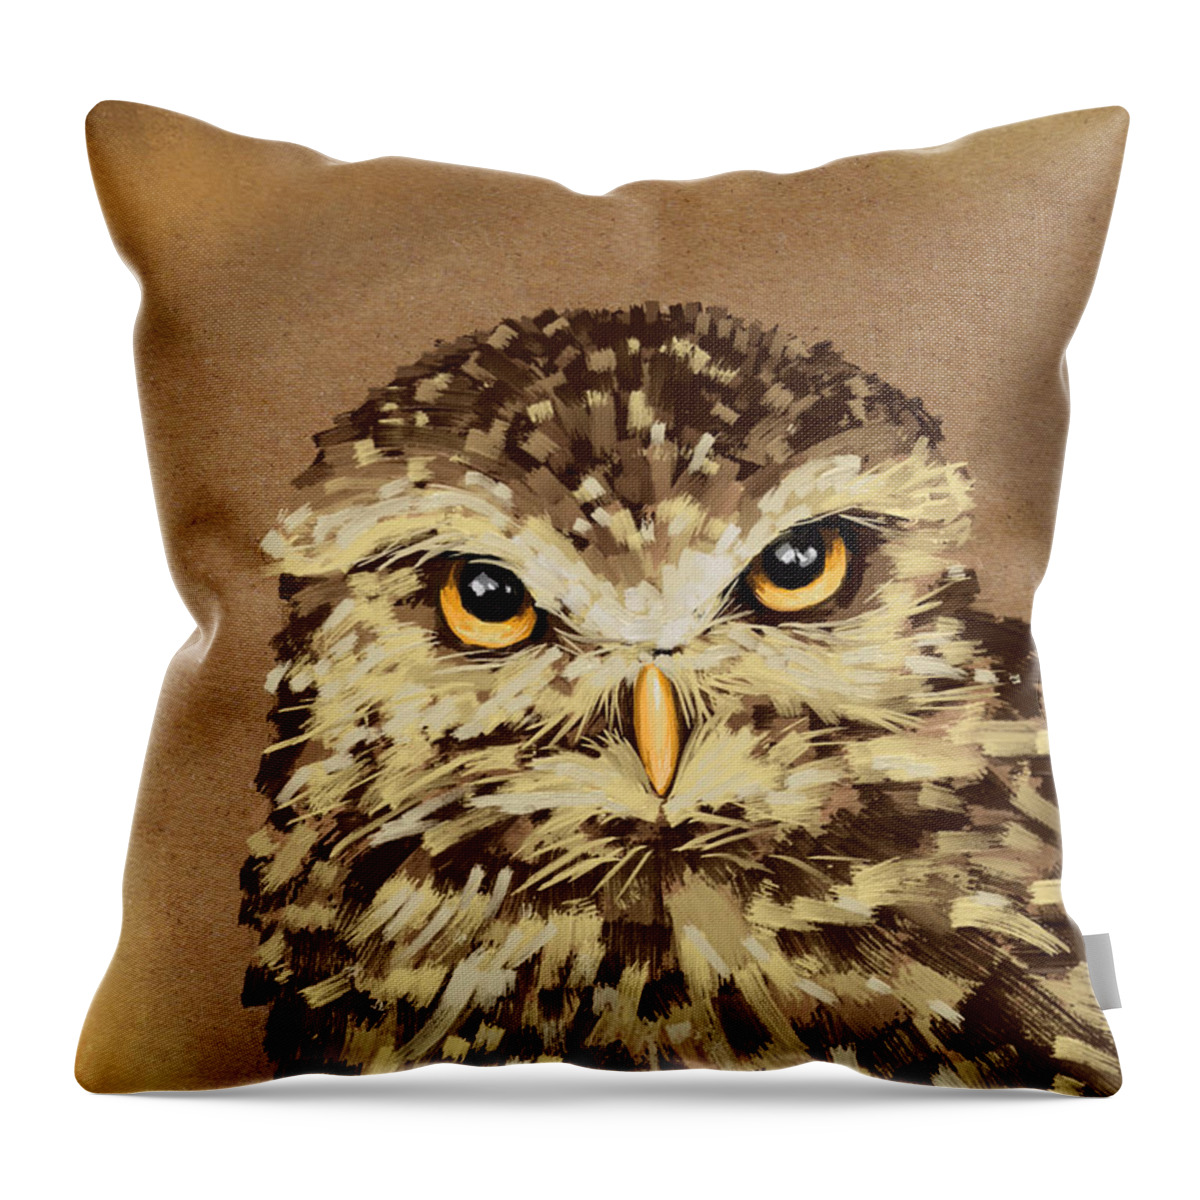 Owl Throw Pillow featuring the painting Owl by Veronica Minozzi